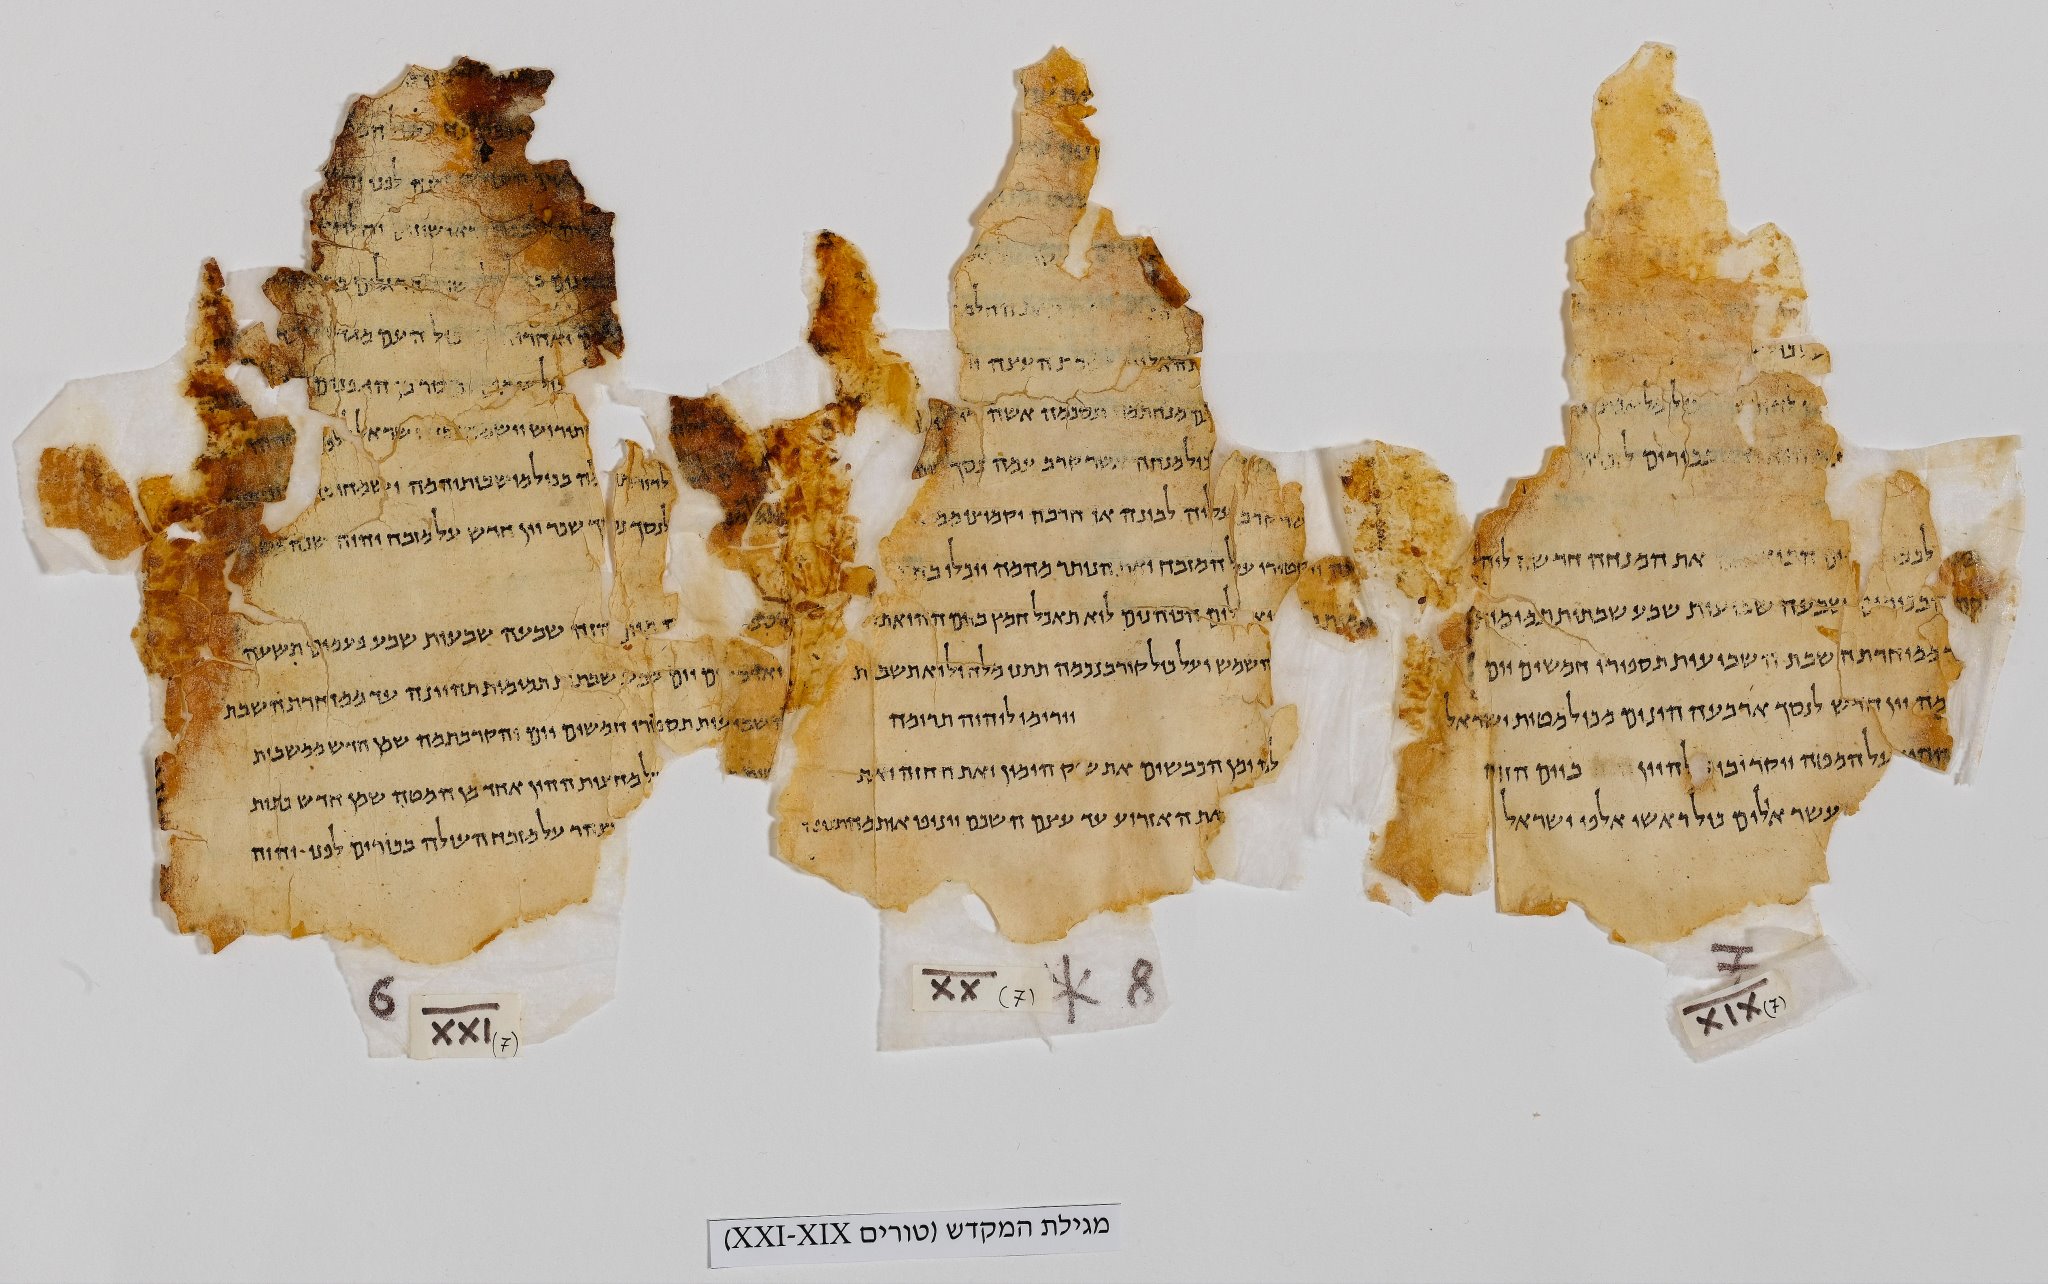 What lessons can be learned from the study of the Dead Sea Scrolls?